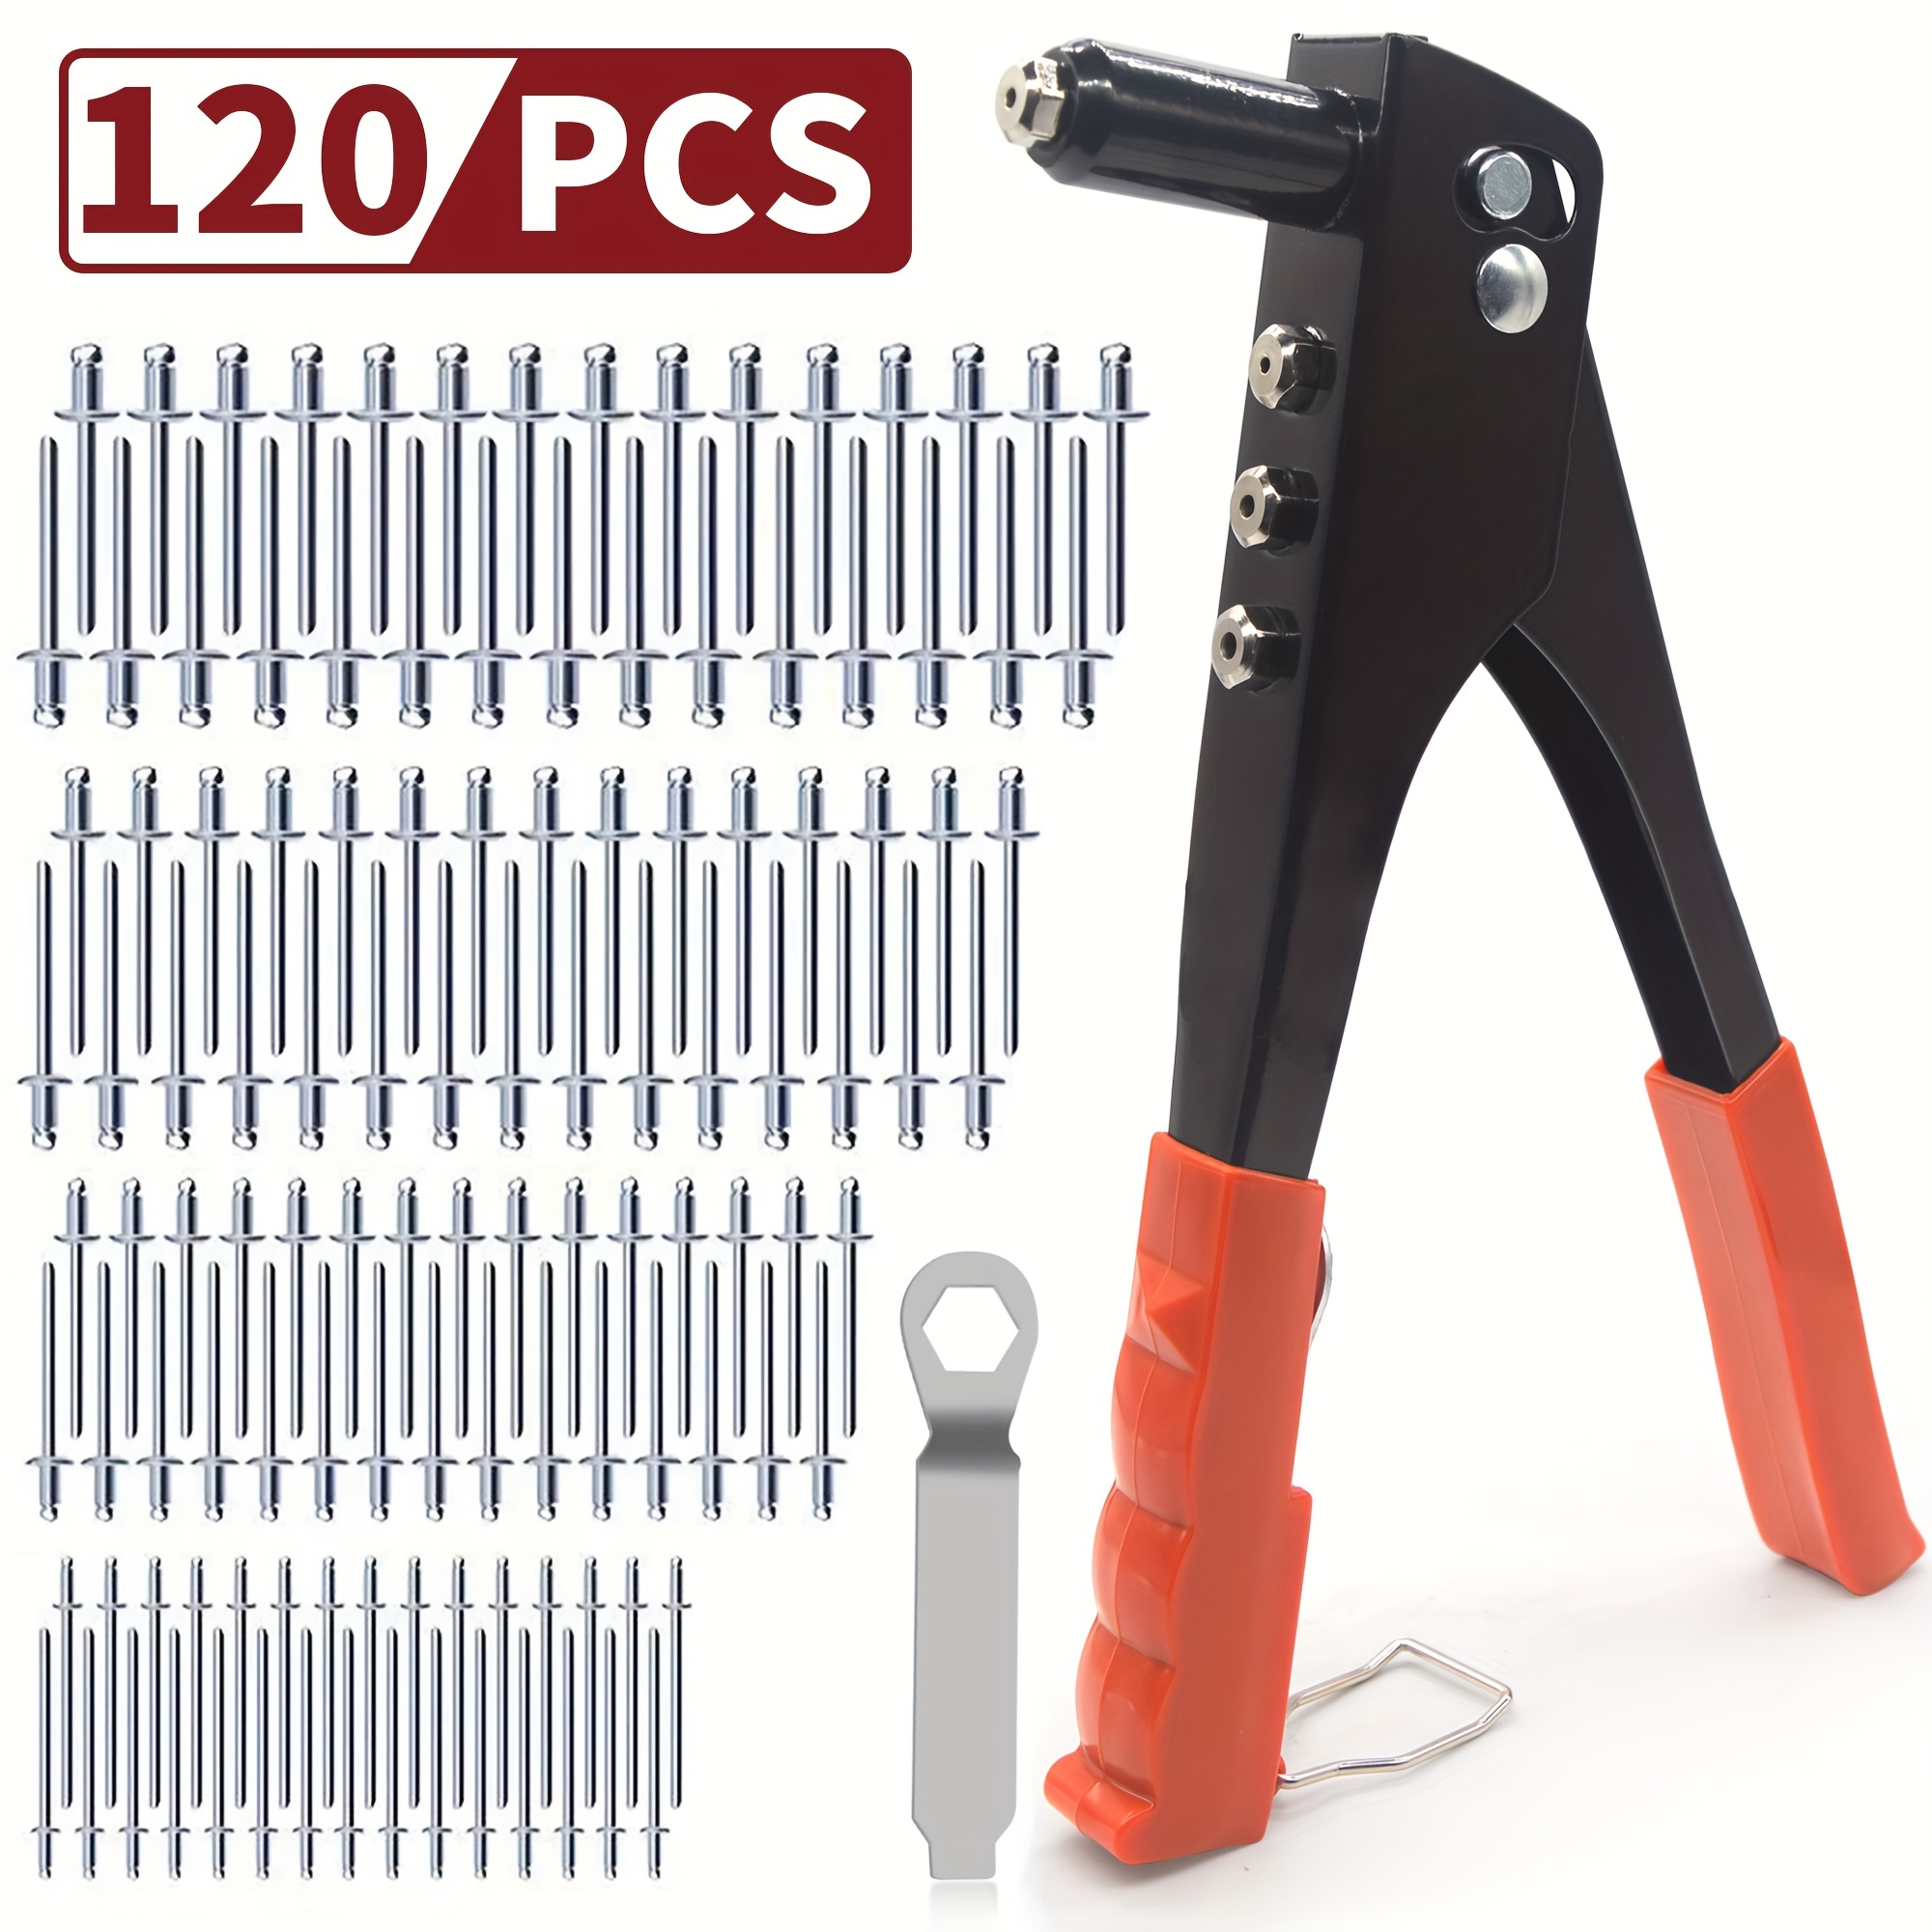 

Heavy Duty Hand , Rivet Gun, 3/32"-1/8"-5/32"-3/16", 4 Nosepieces Set Includes 120pcs Rivets, Durable And Suitable For Metal, Plastic And Leather